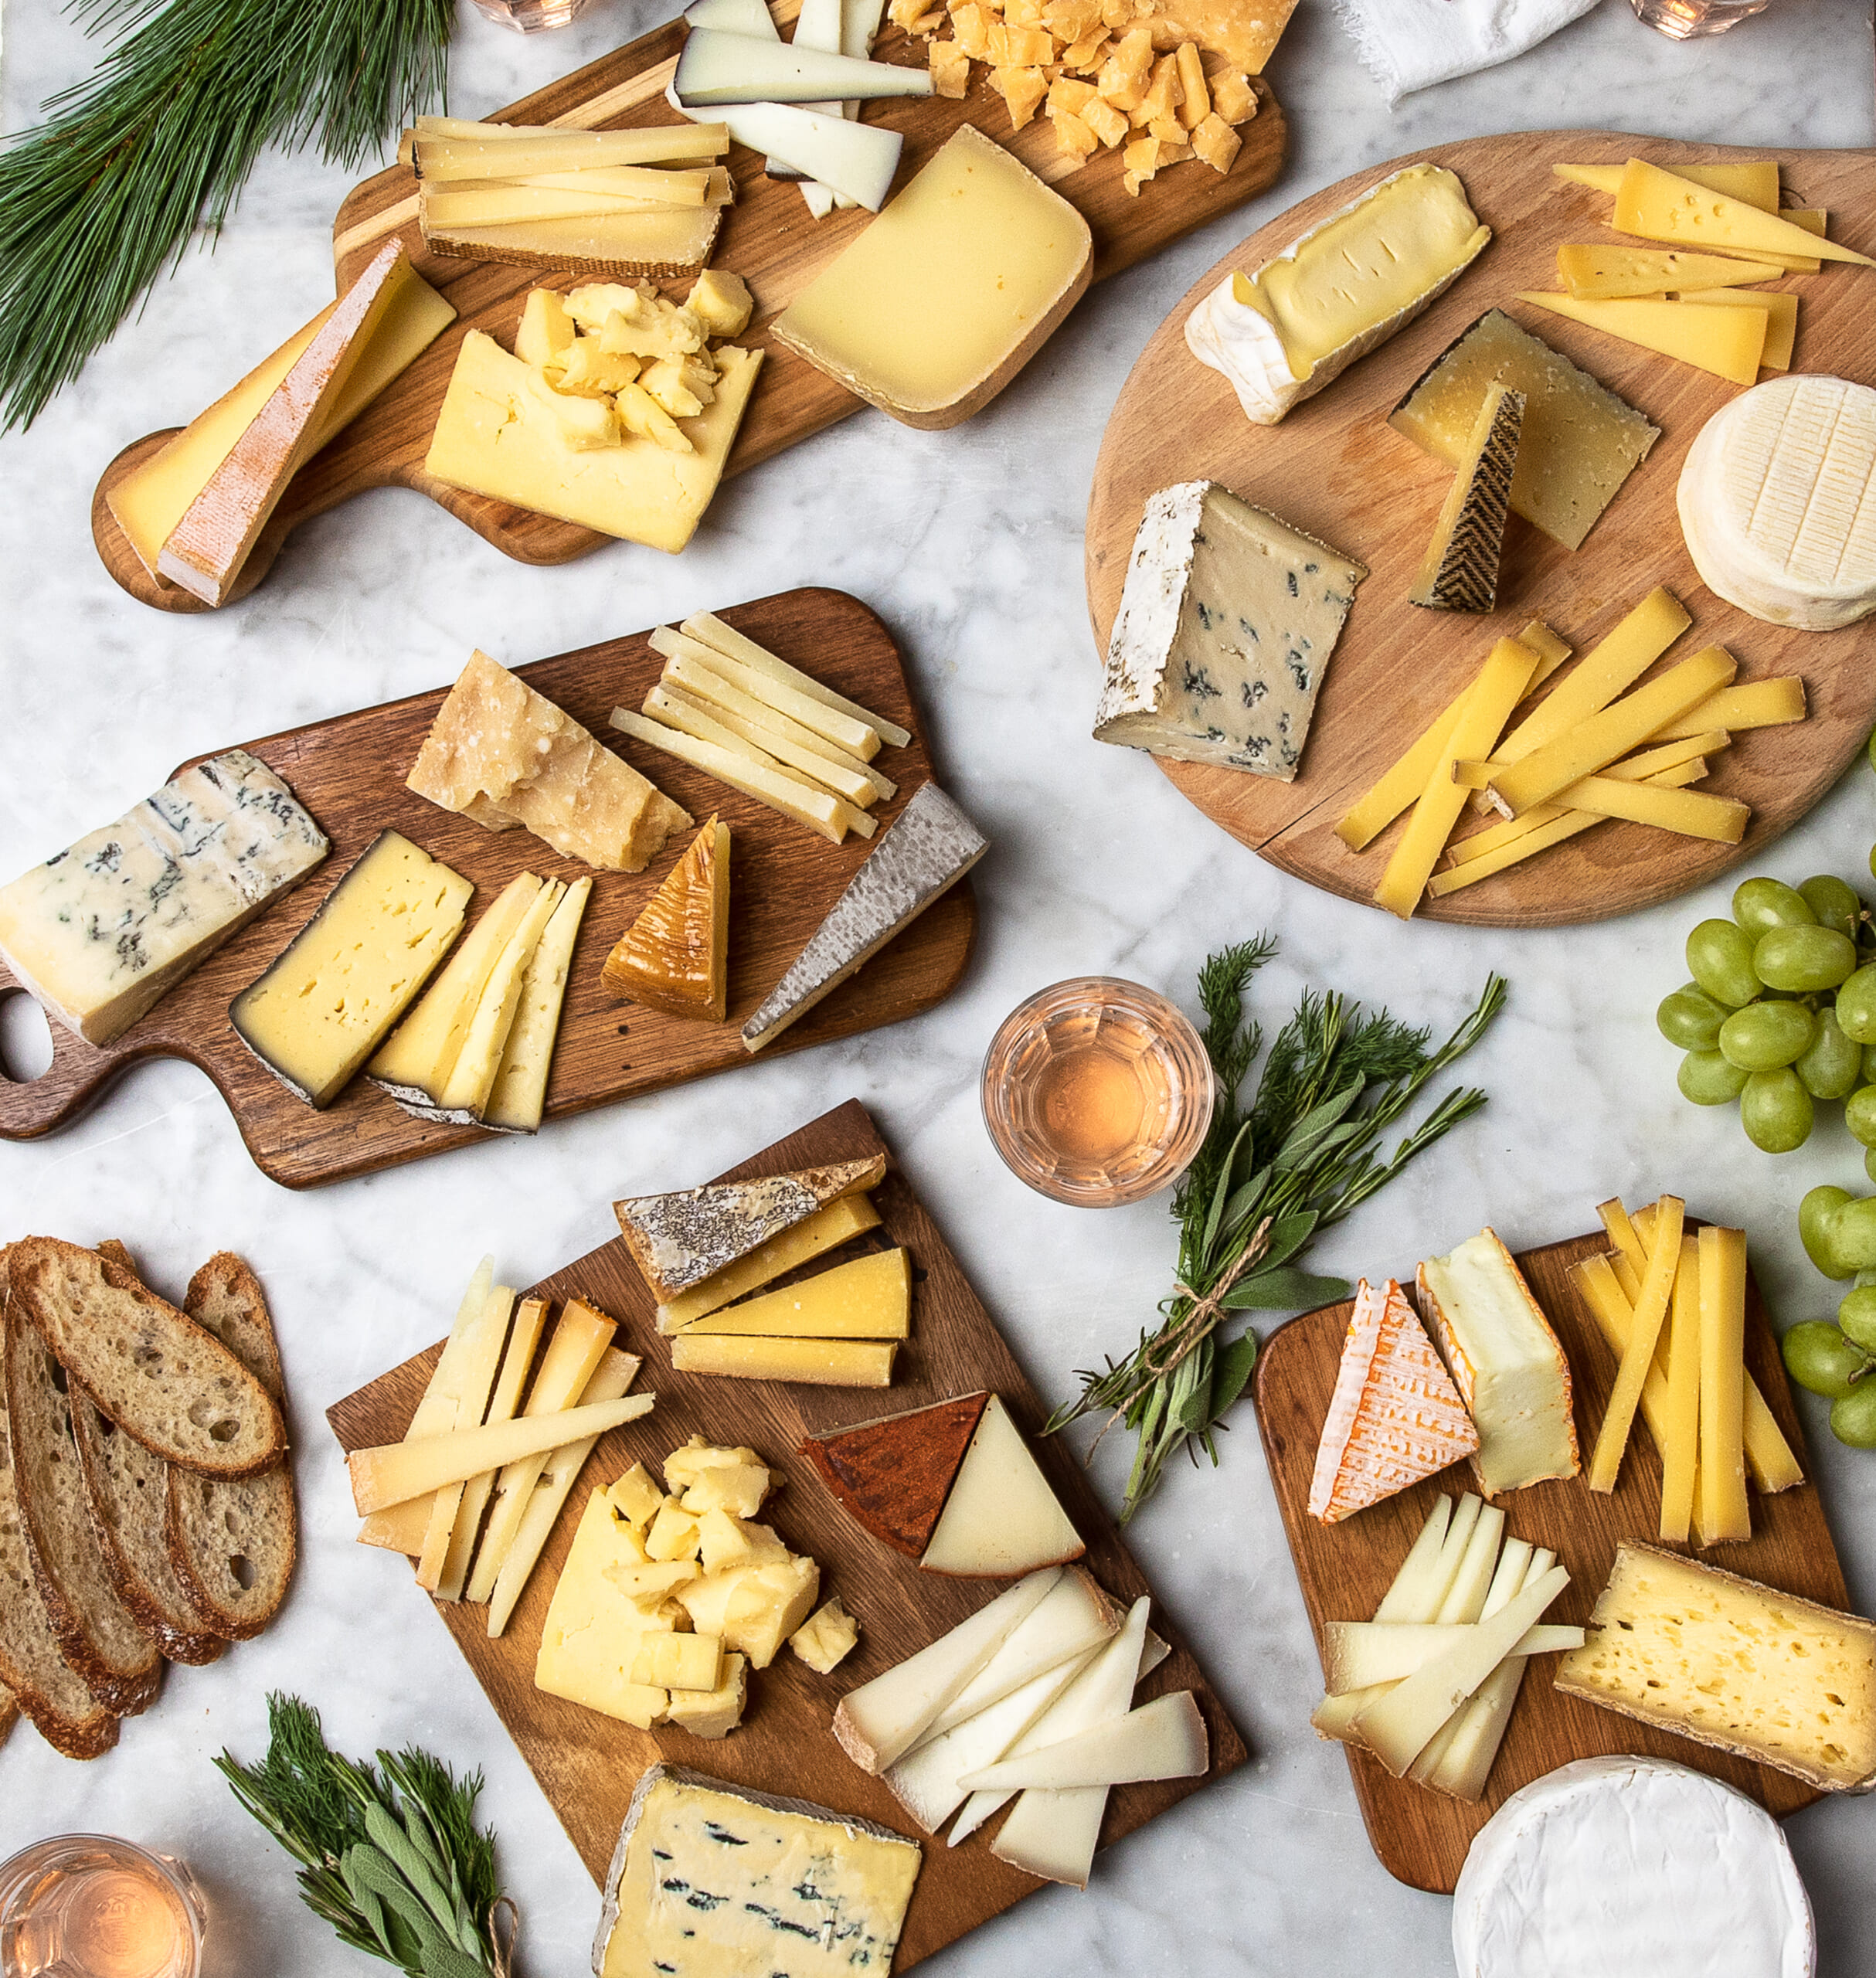 https://www.maxim.com/wp-content/uploads/2021/05/cheese-boards-scaled.jpg